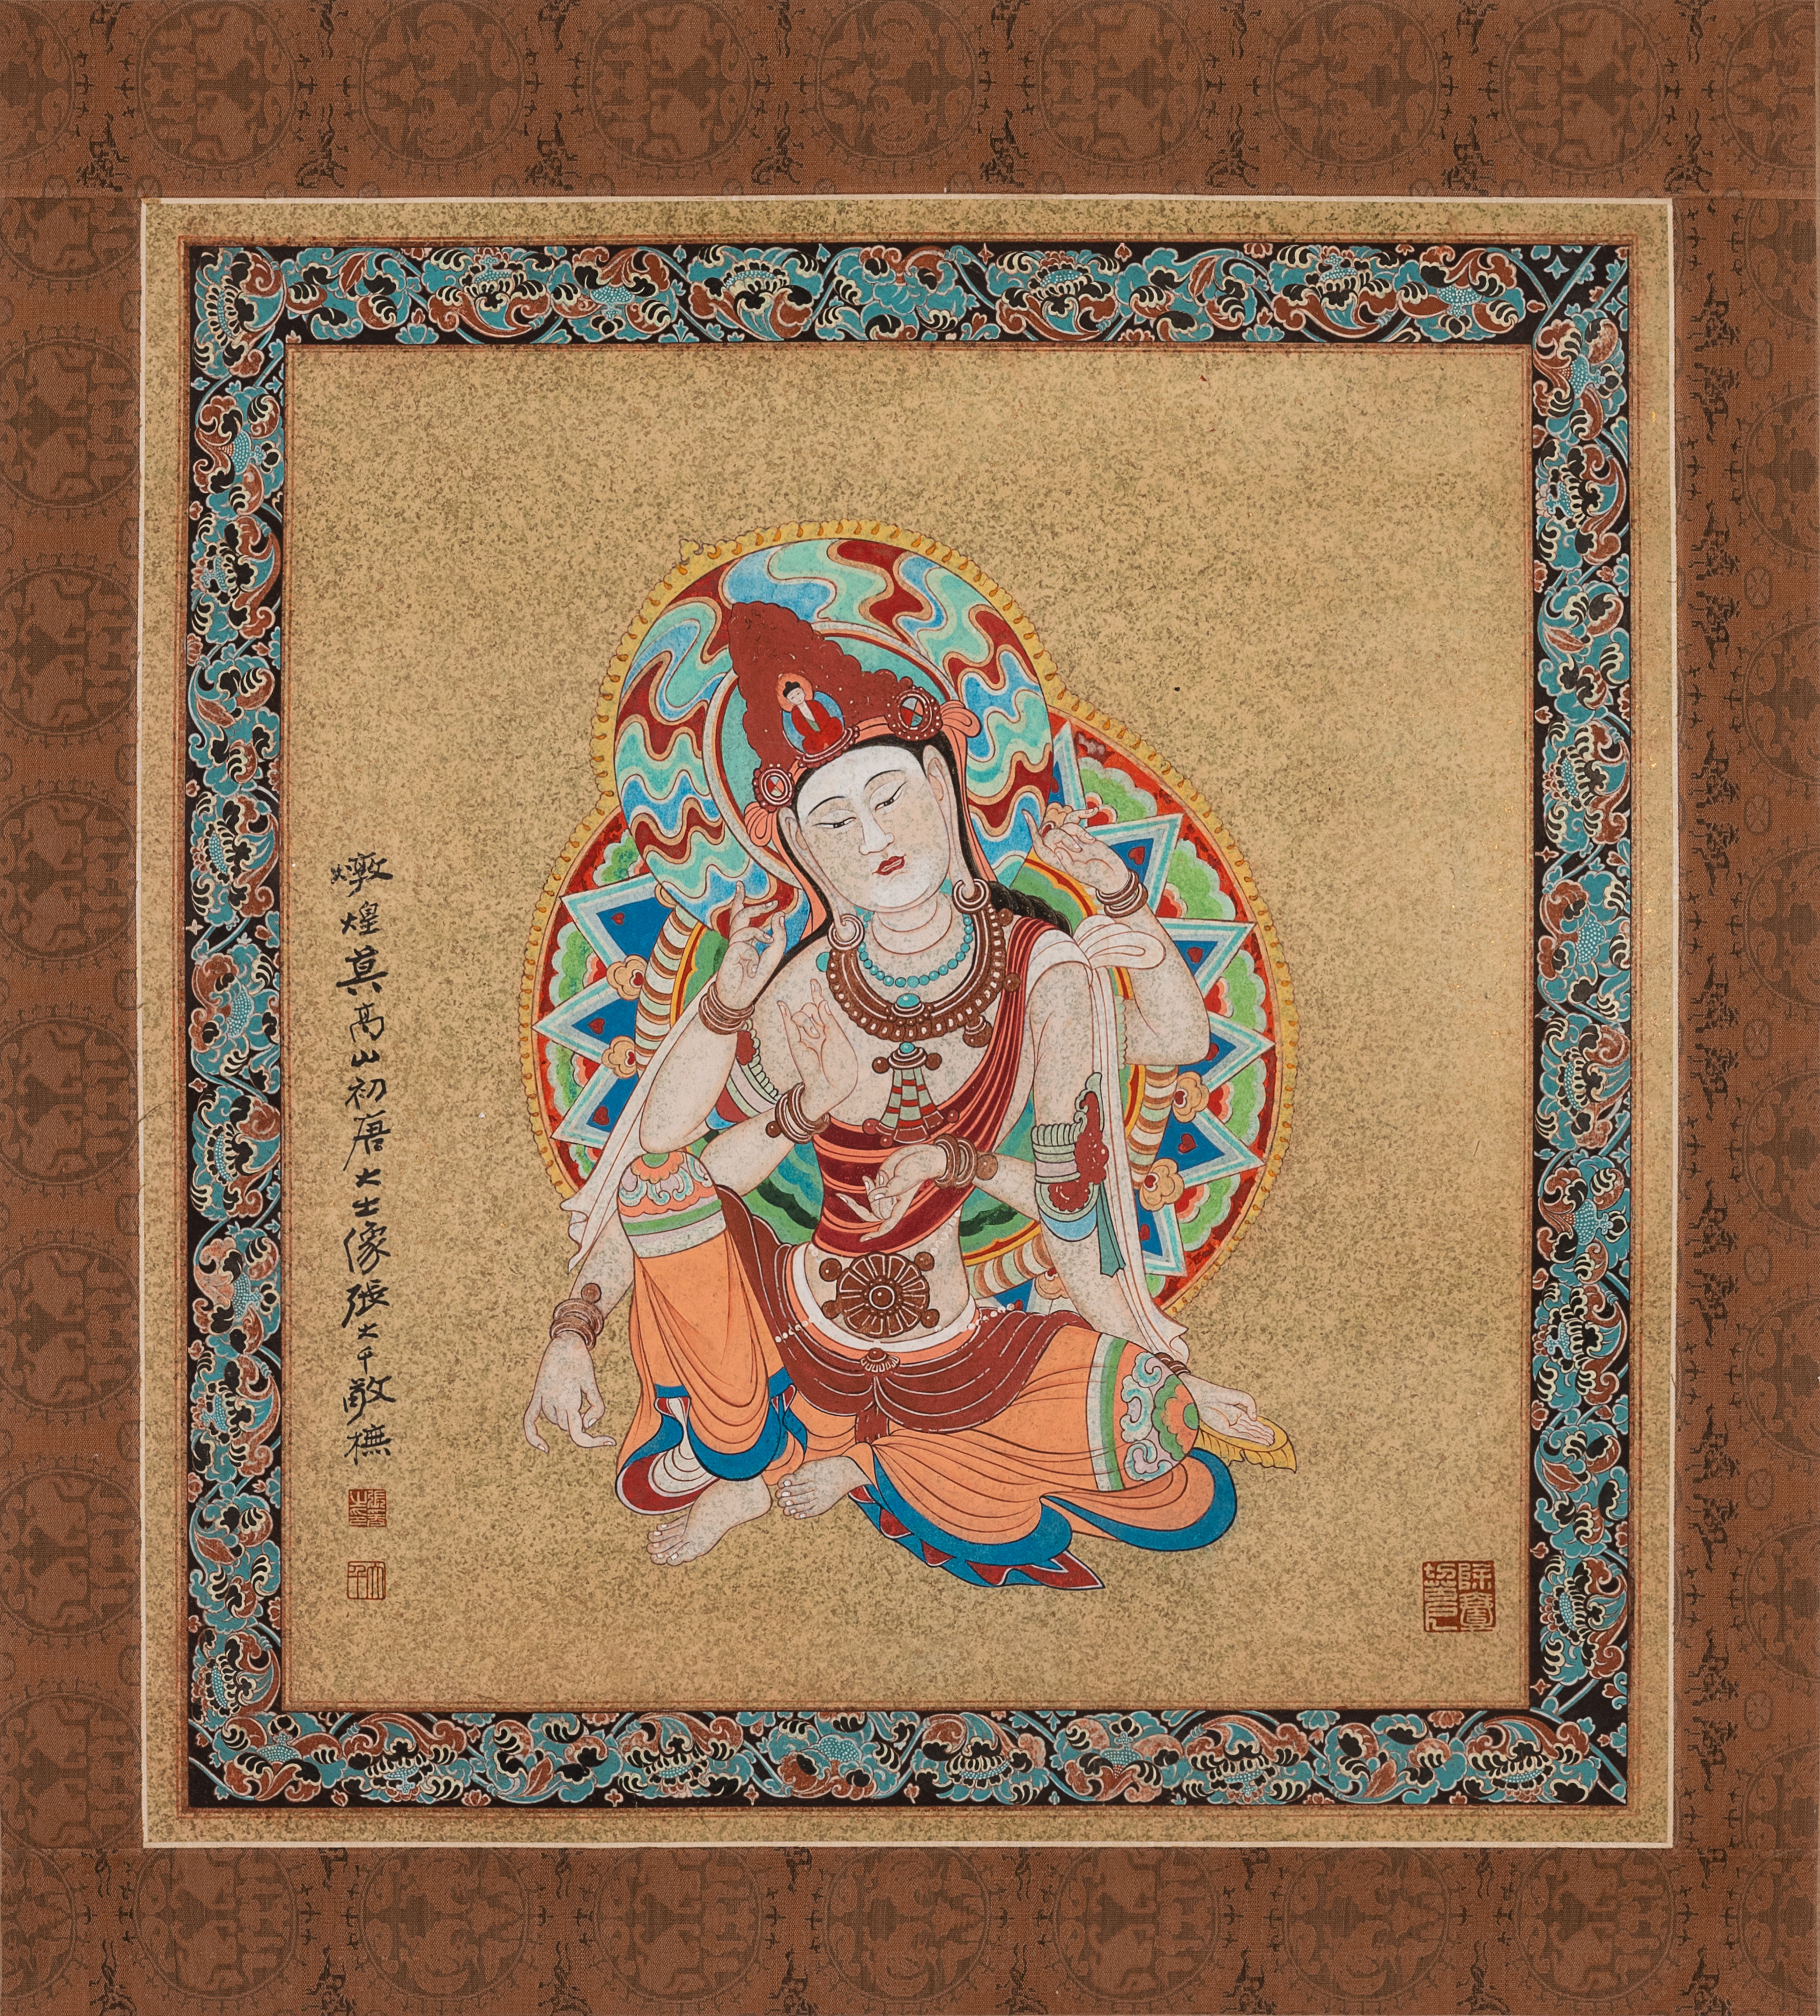 Zhang Daqian (1898-1983): 'Bodhisattva', ink and colour on gold paper - Image 2 of 6